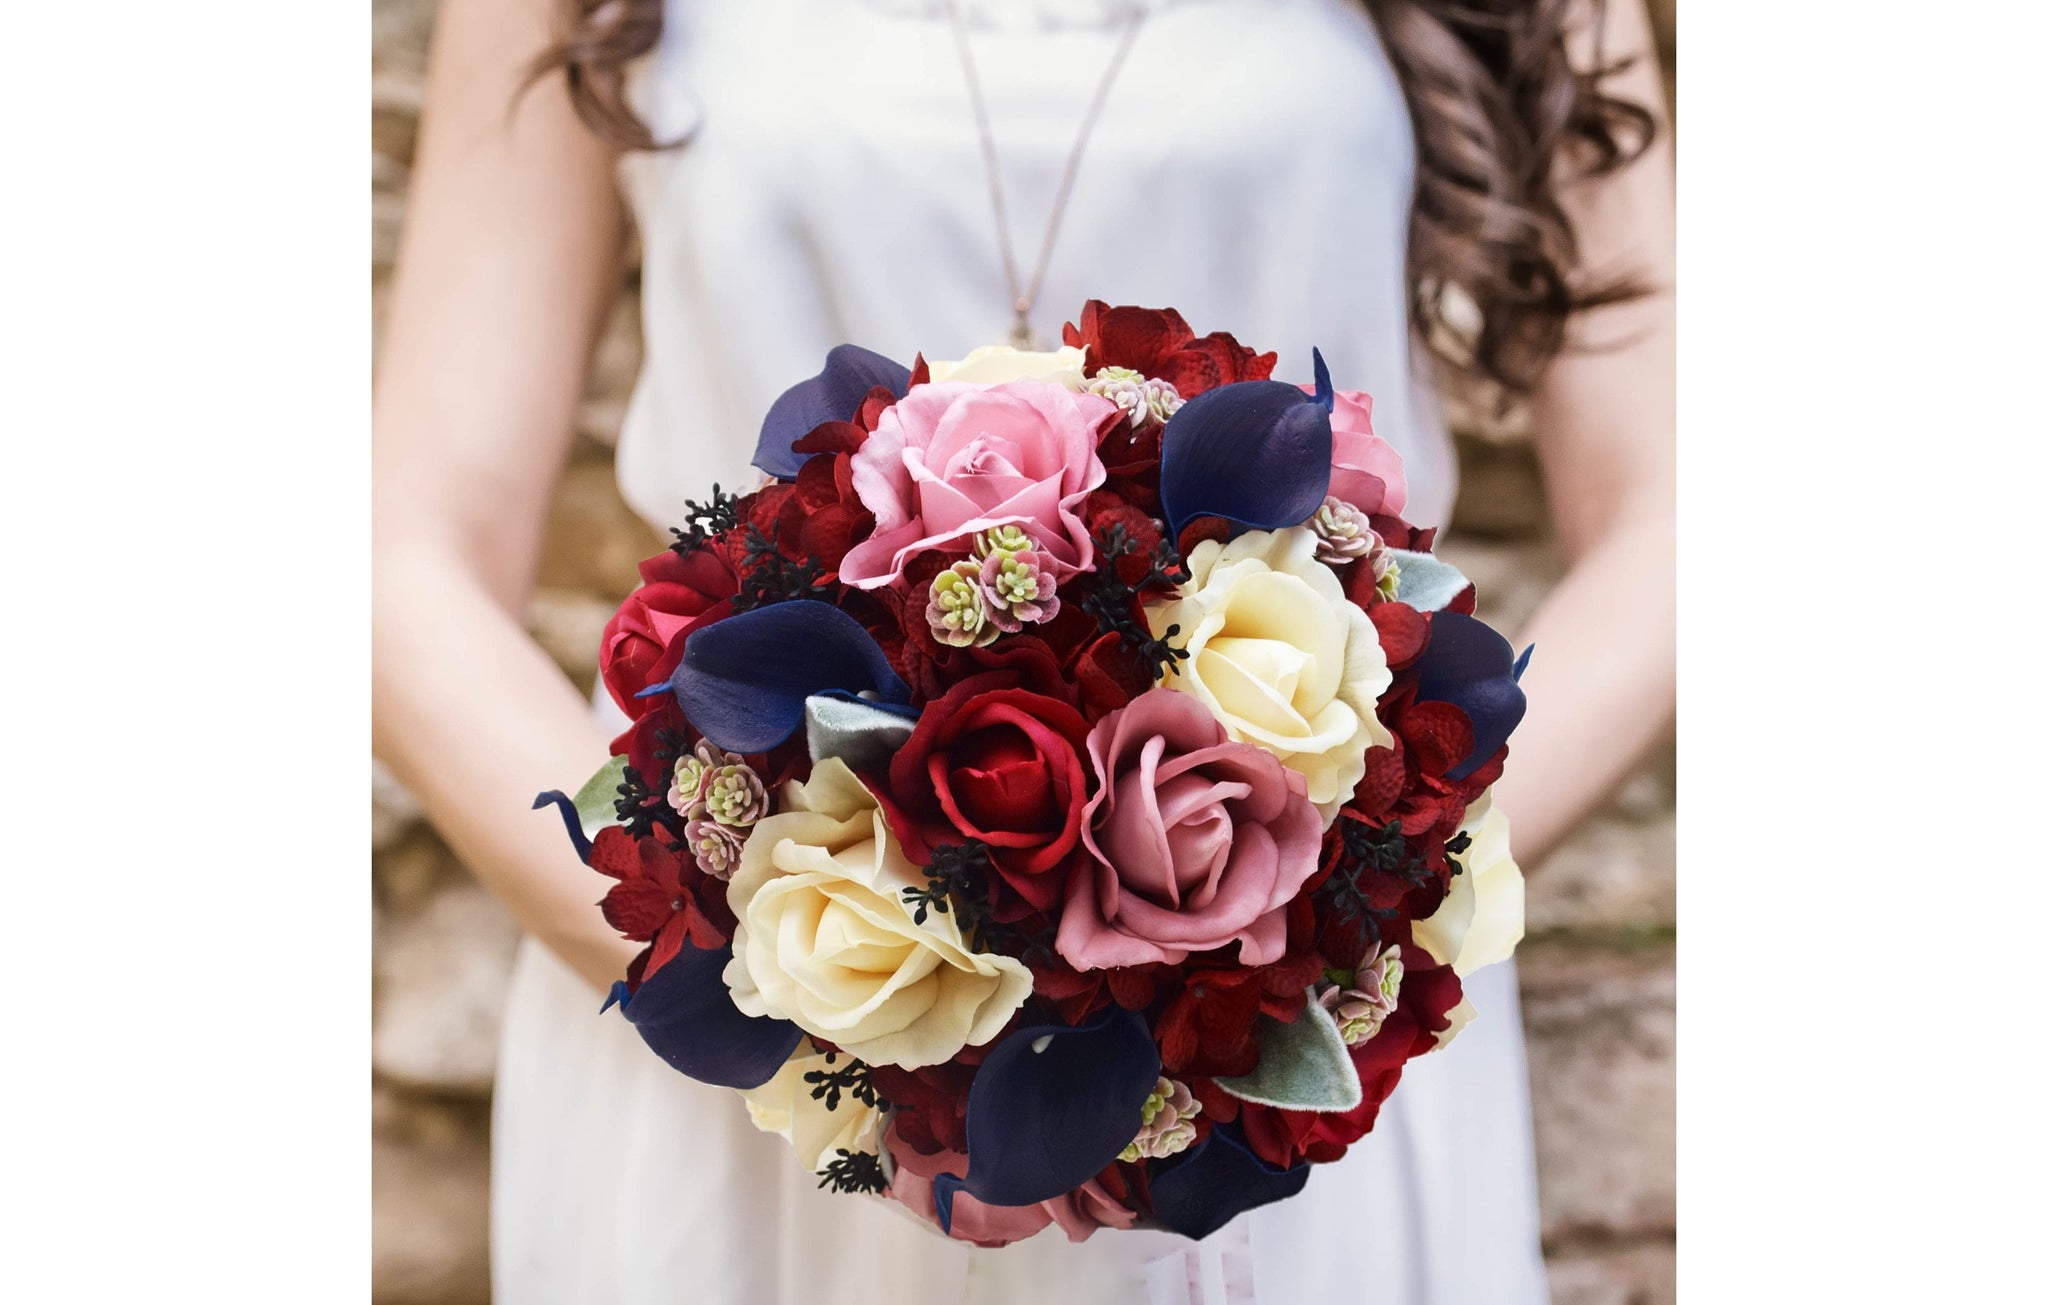 Fall Wedding Bridal or Bridesmaid Bouquet Mauve Burgundy Navy Red - Succulents Calla Lilies Roses - add Groom Groomsmen Boutonnieres & More!